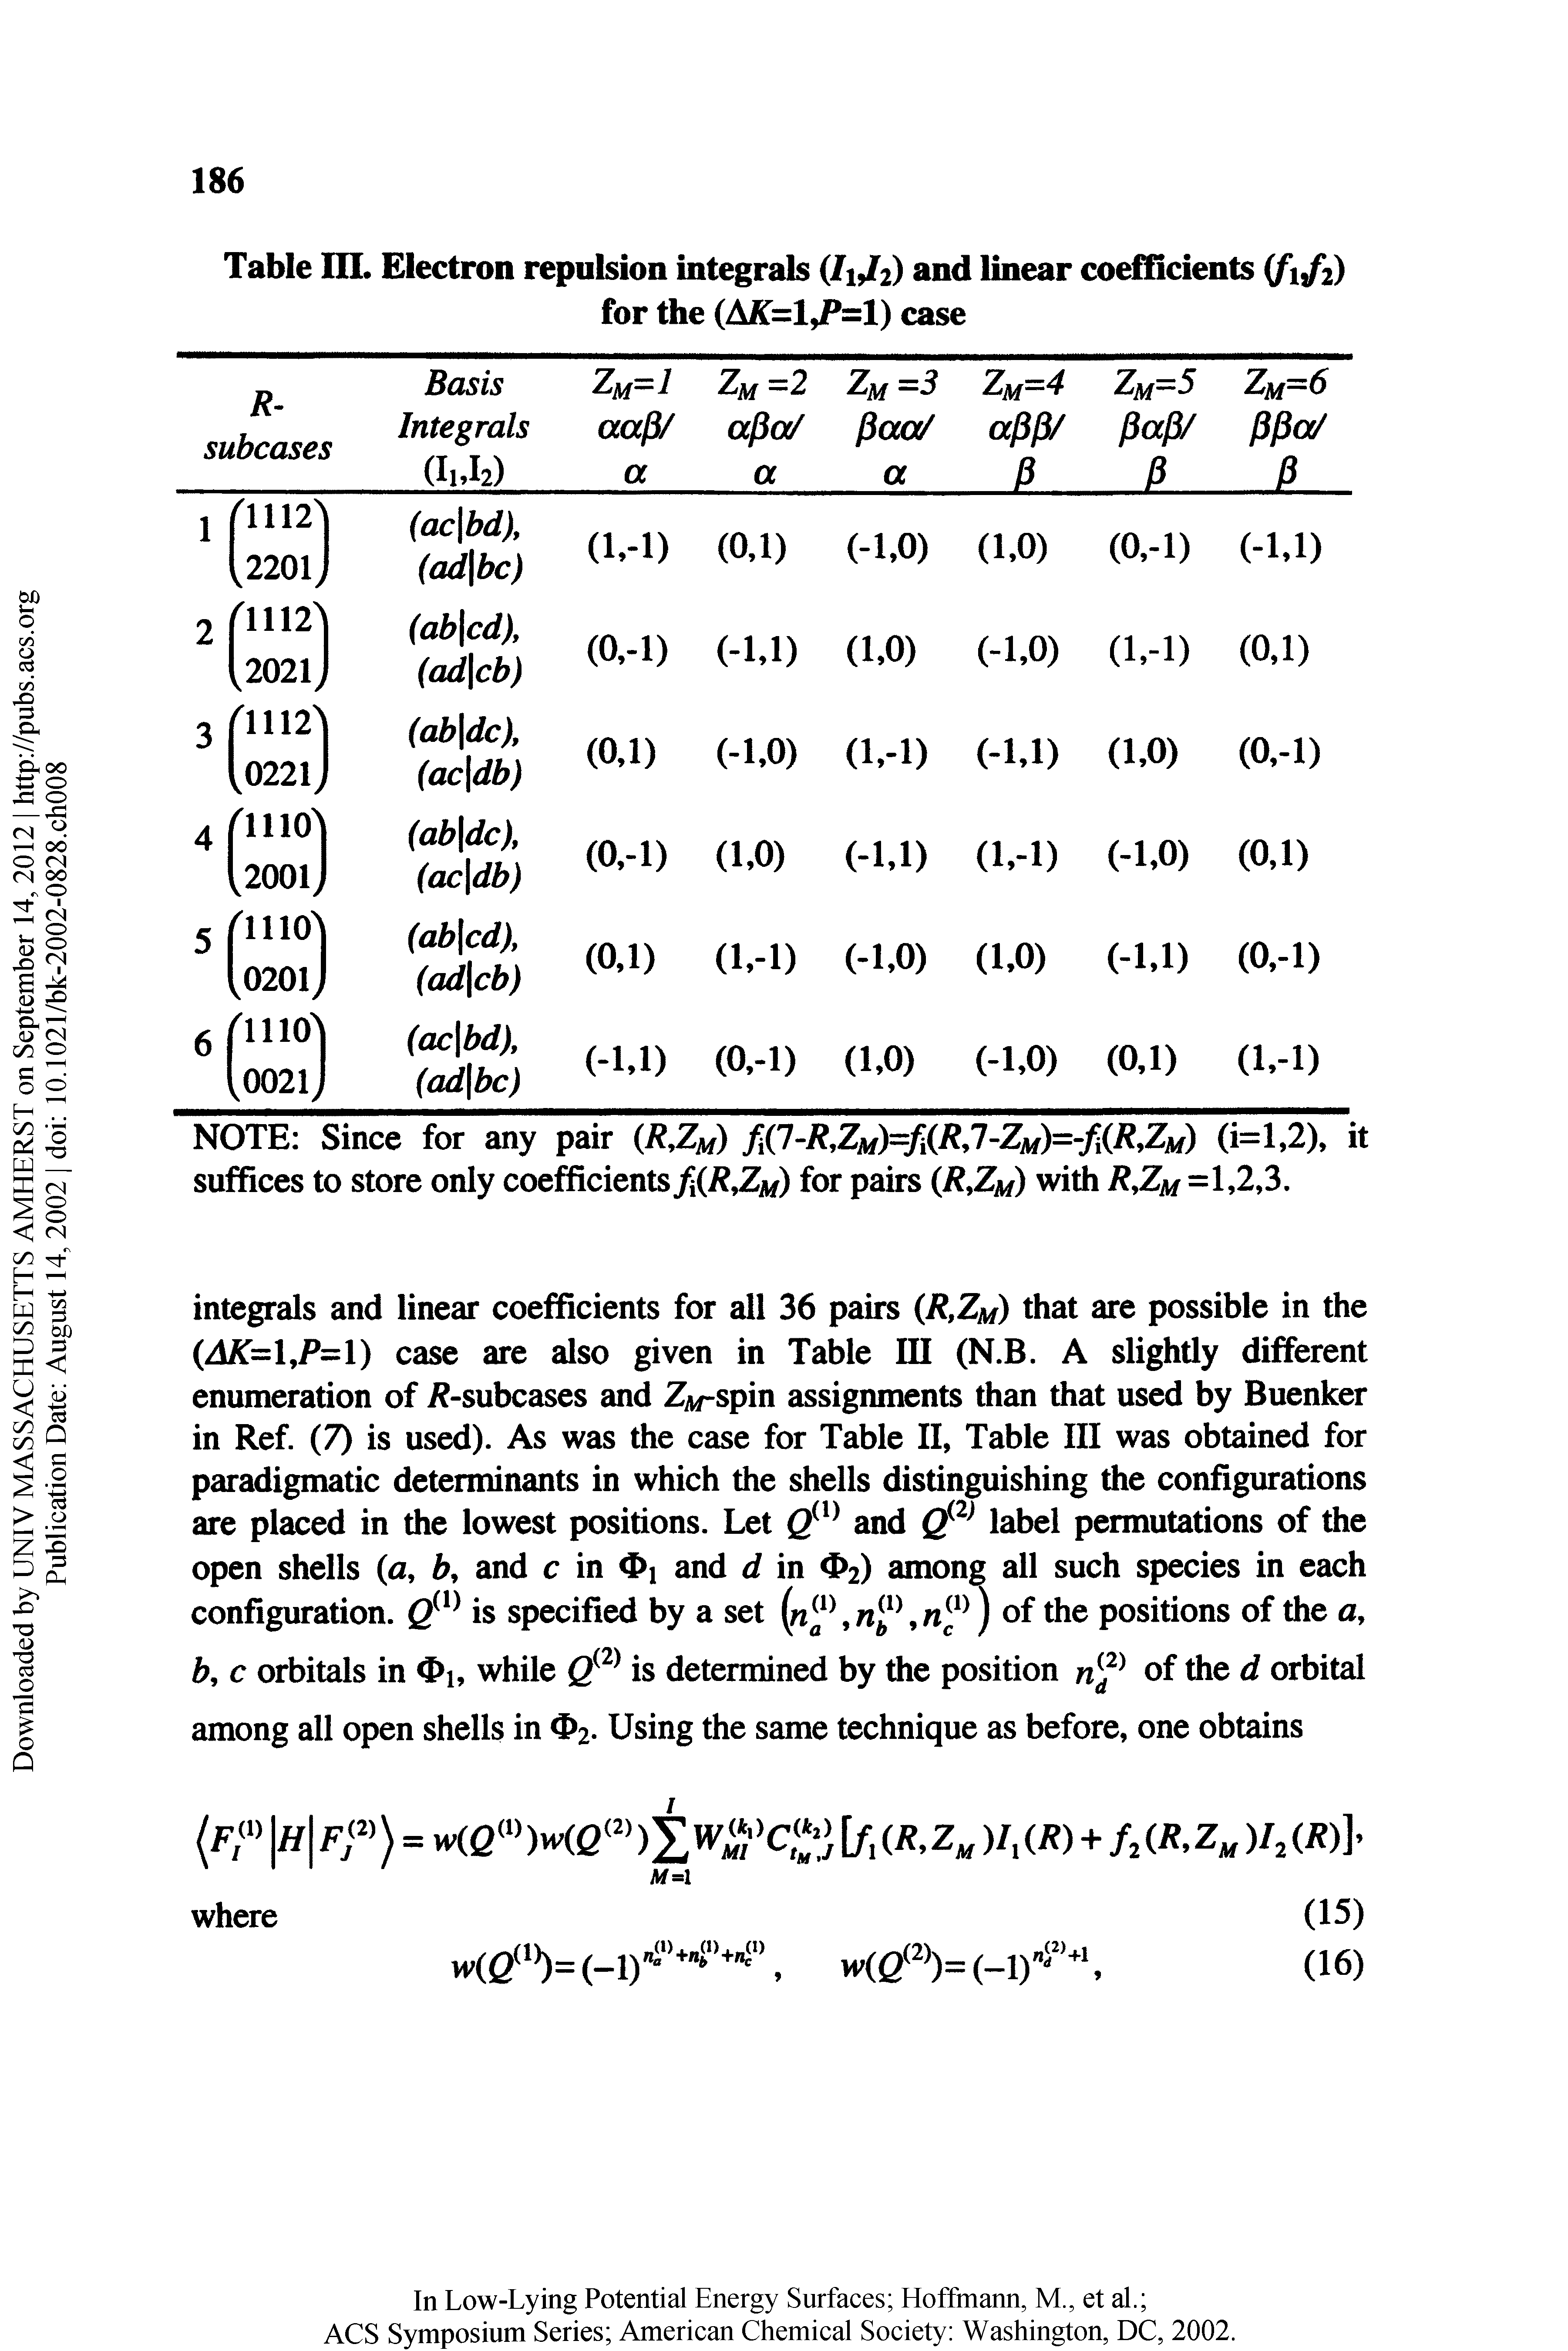 Table IIL Electron repulsion integrals and linear coefficients (/1/2) for the (A8T=1 1) case...